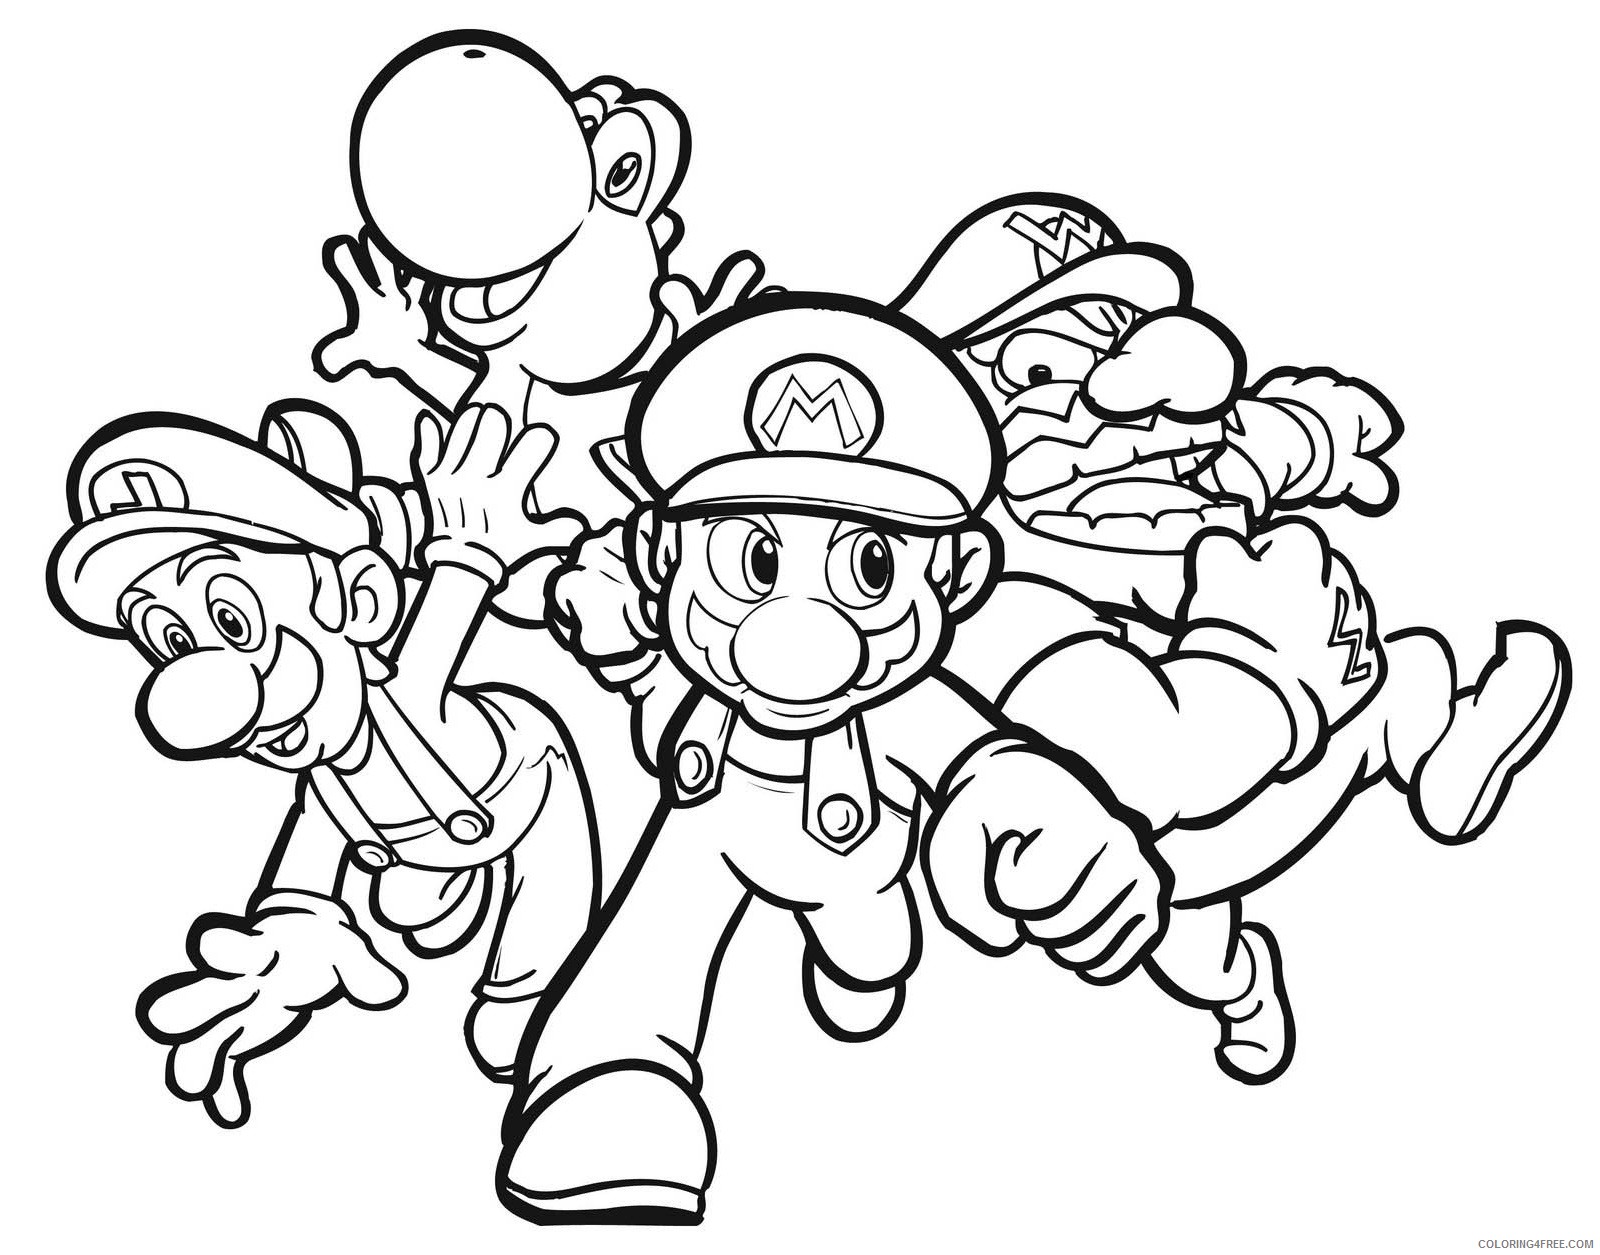 mario kart coloring pages to print Coloring4free